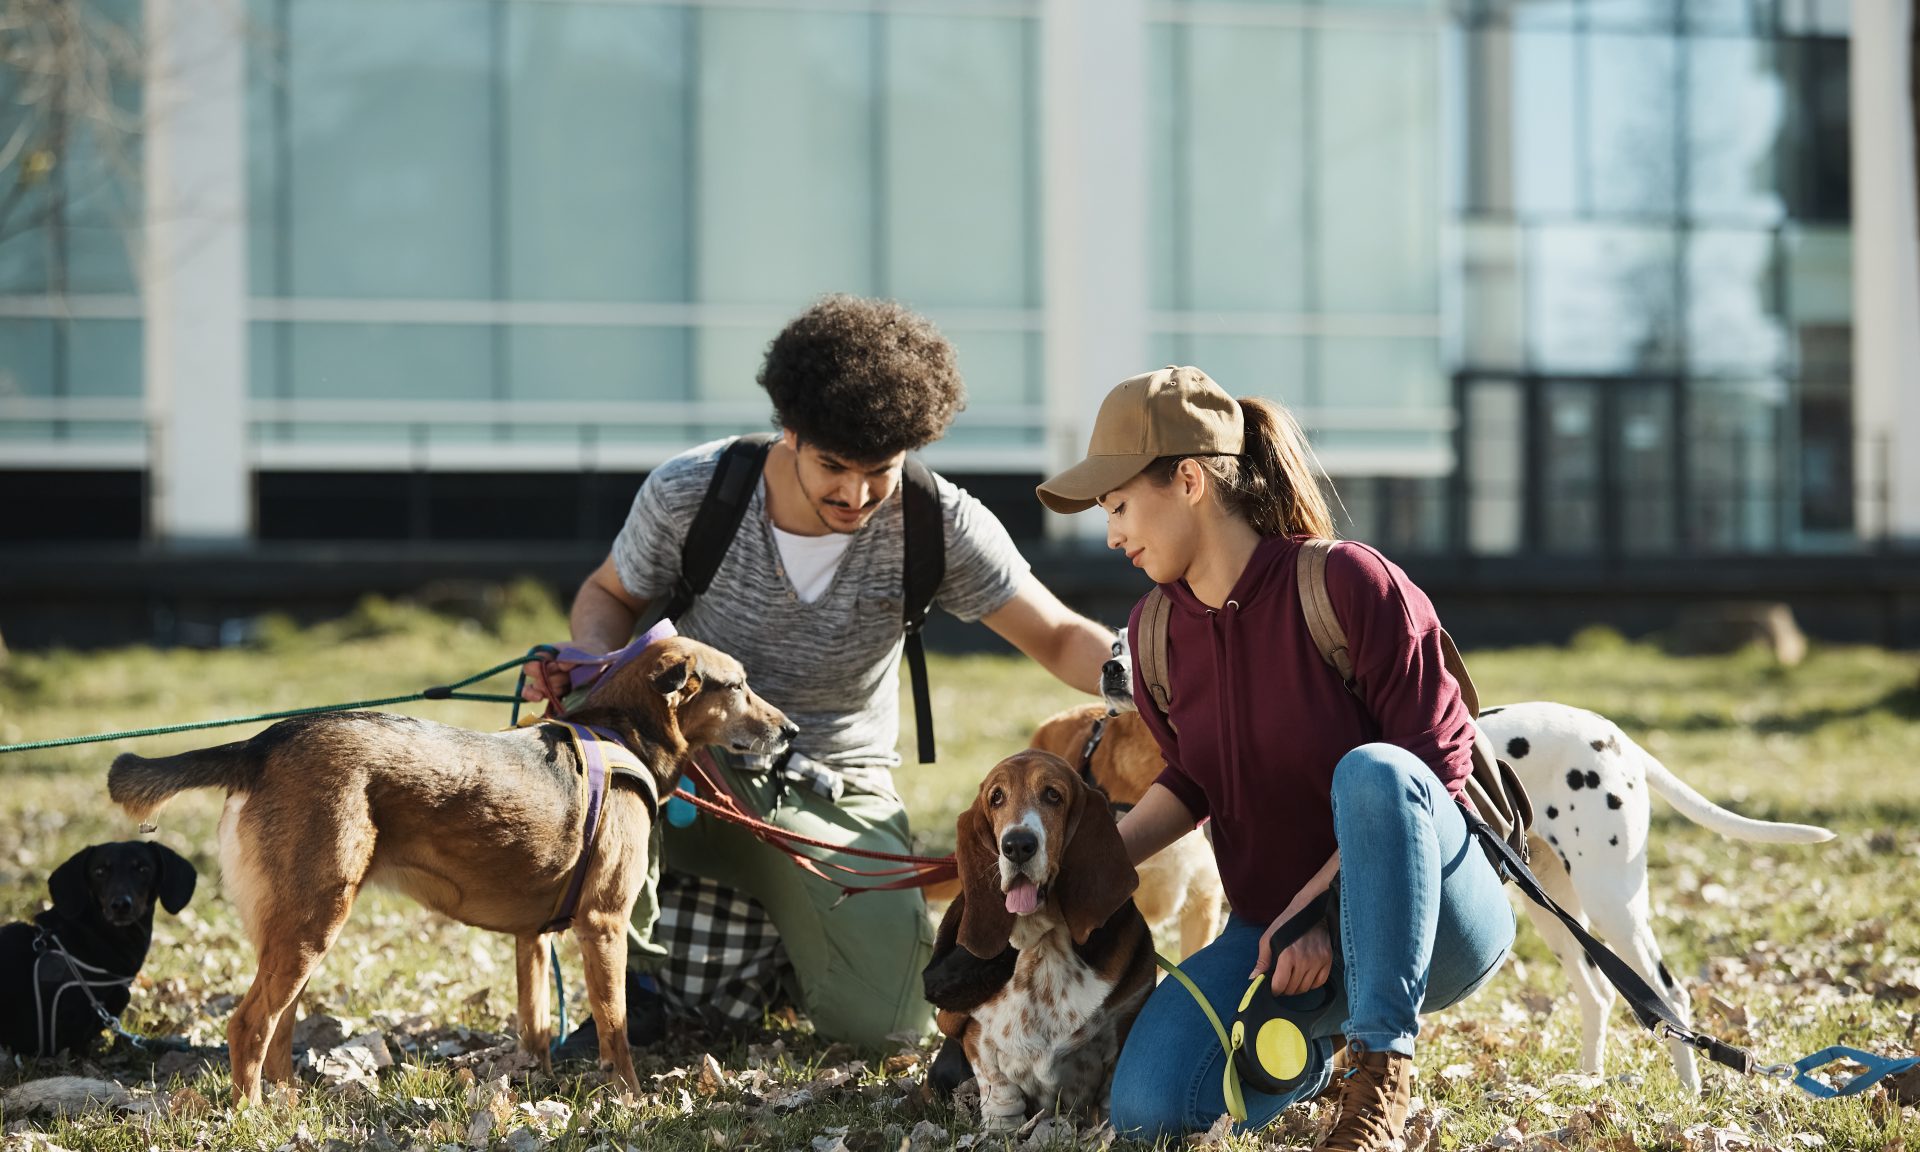 Compare business insurance for dog walkers